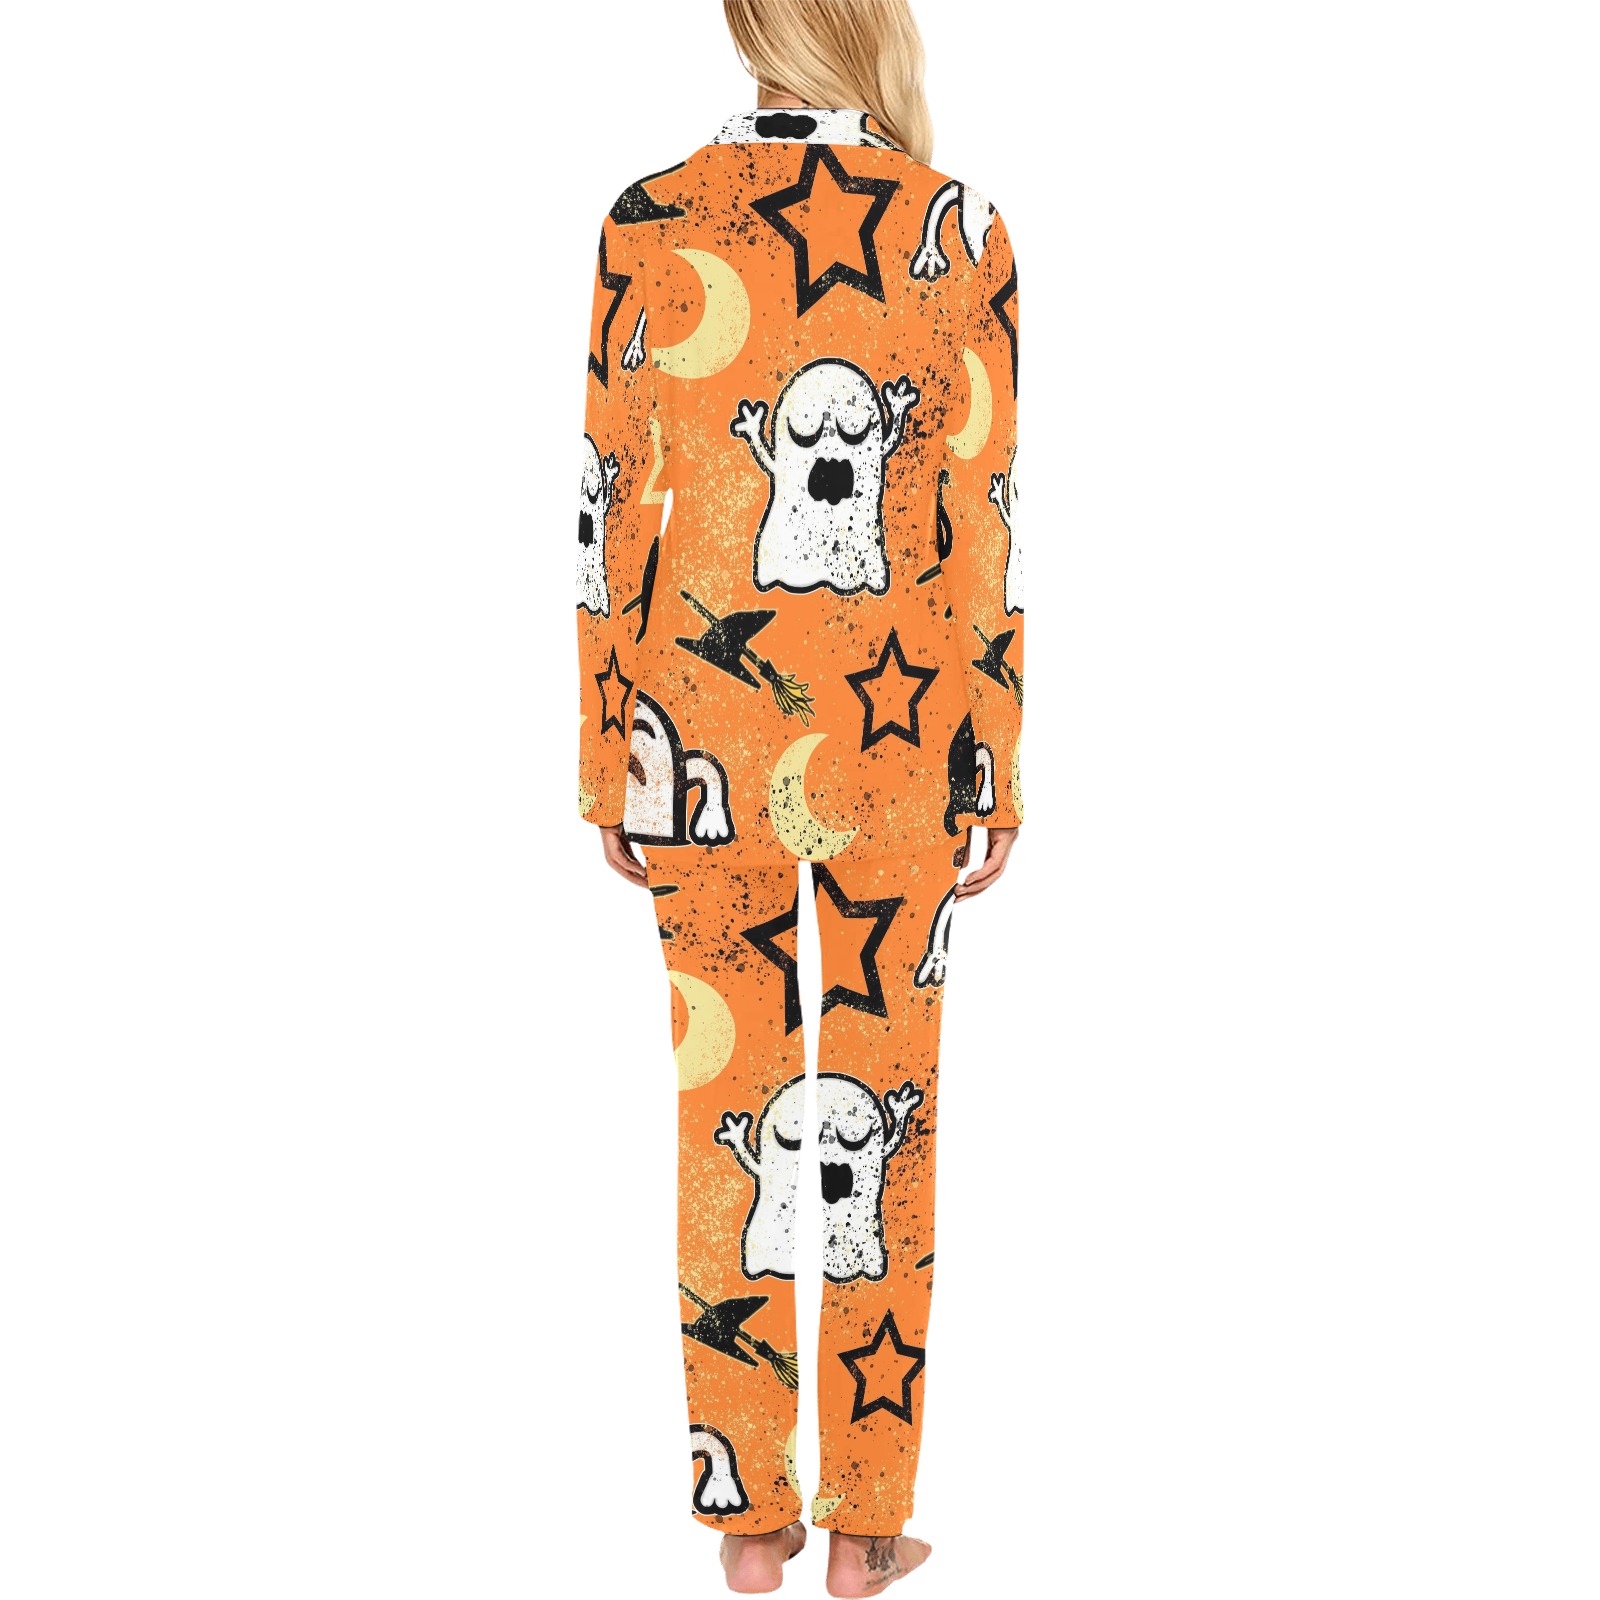 Painted Ghosts and Cats Women's Long Pajama Set